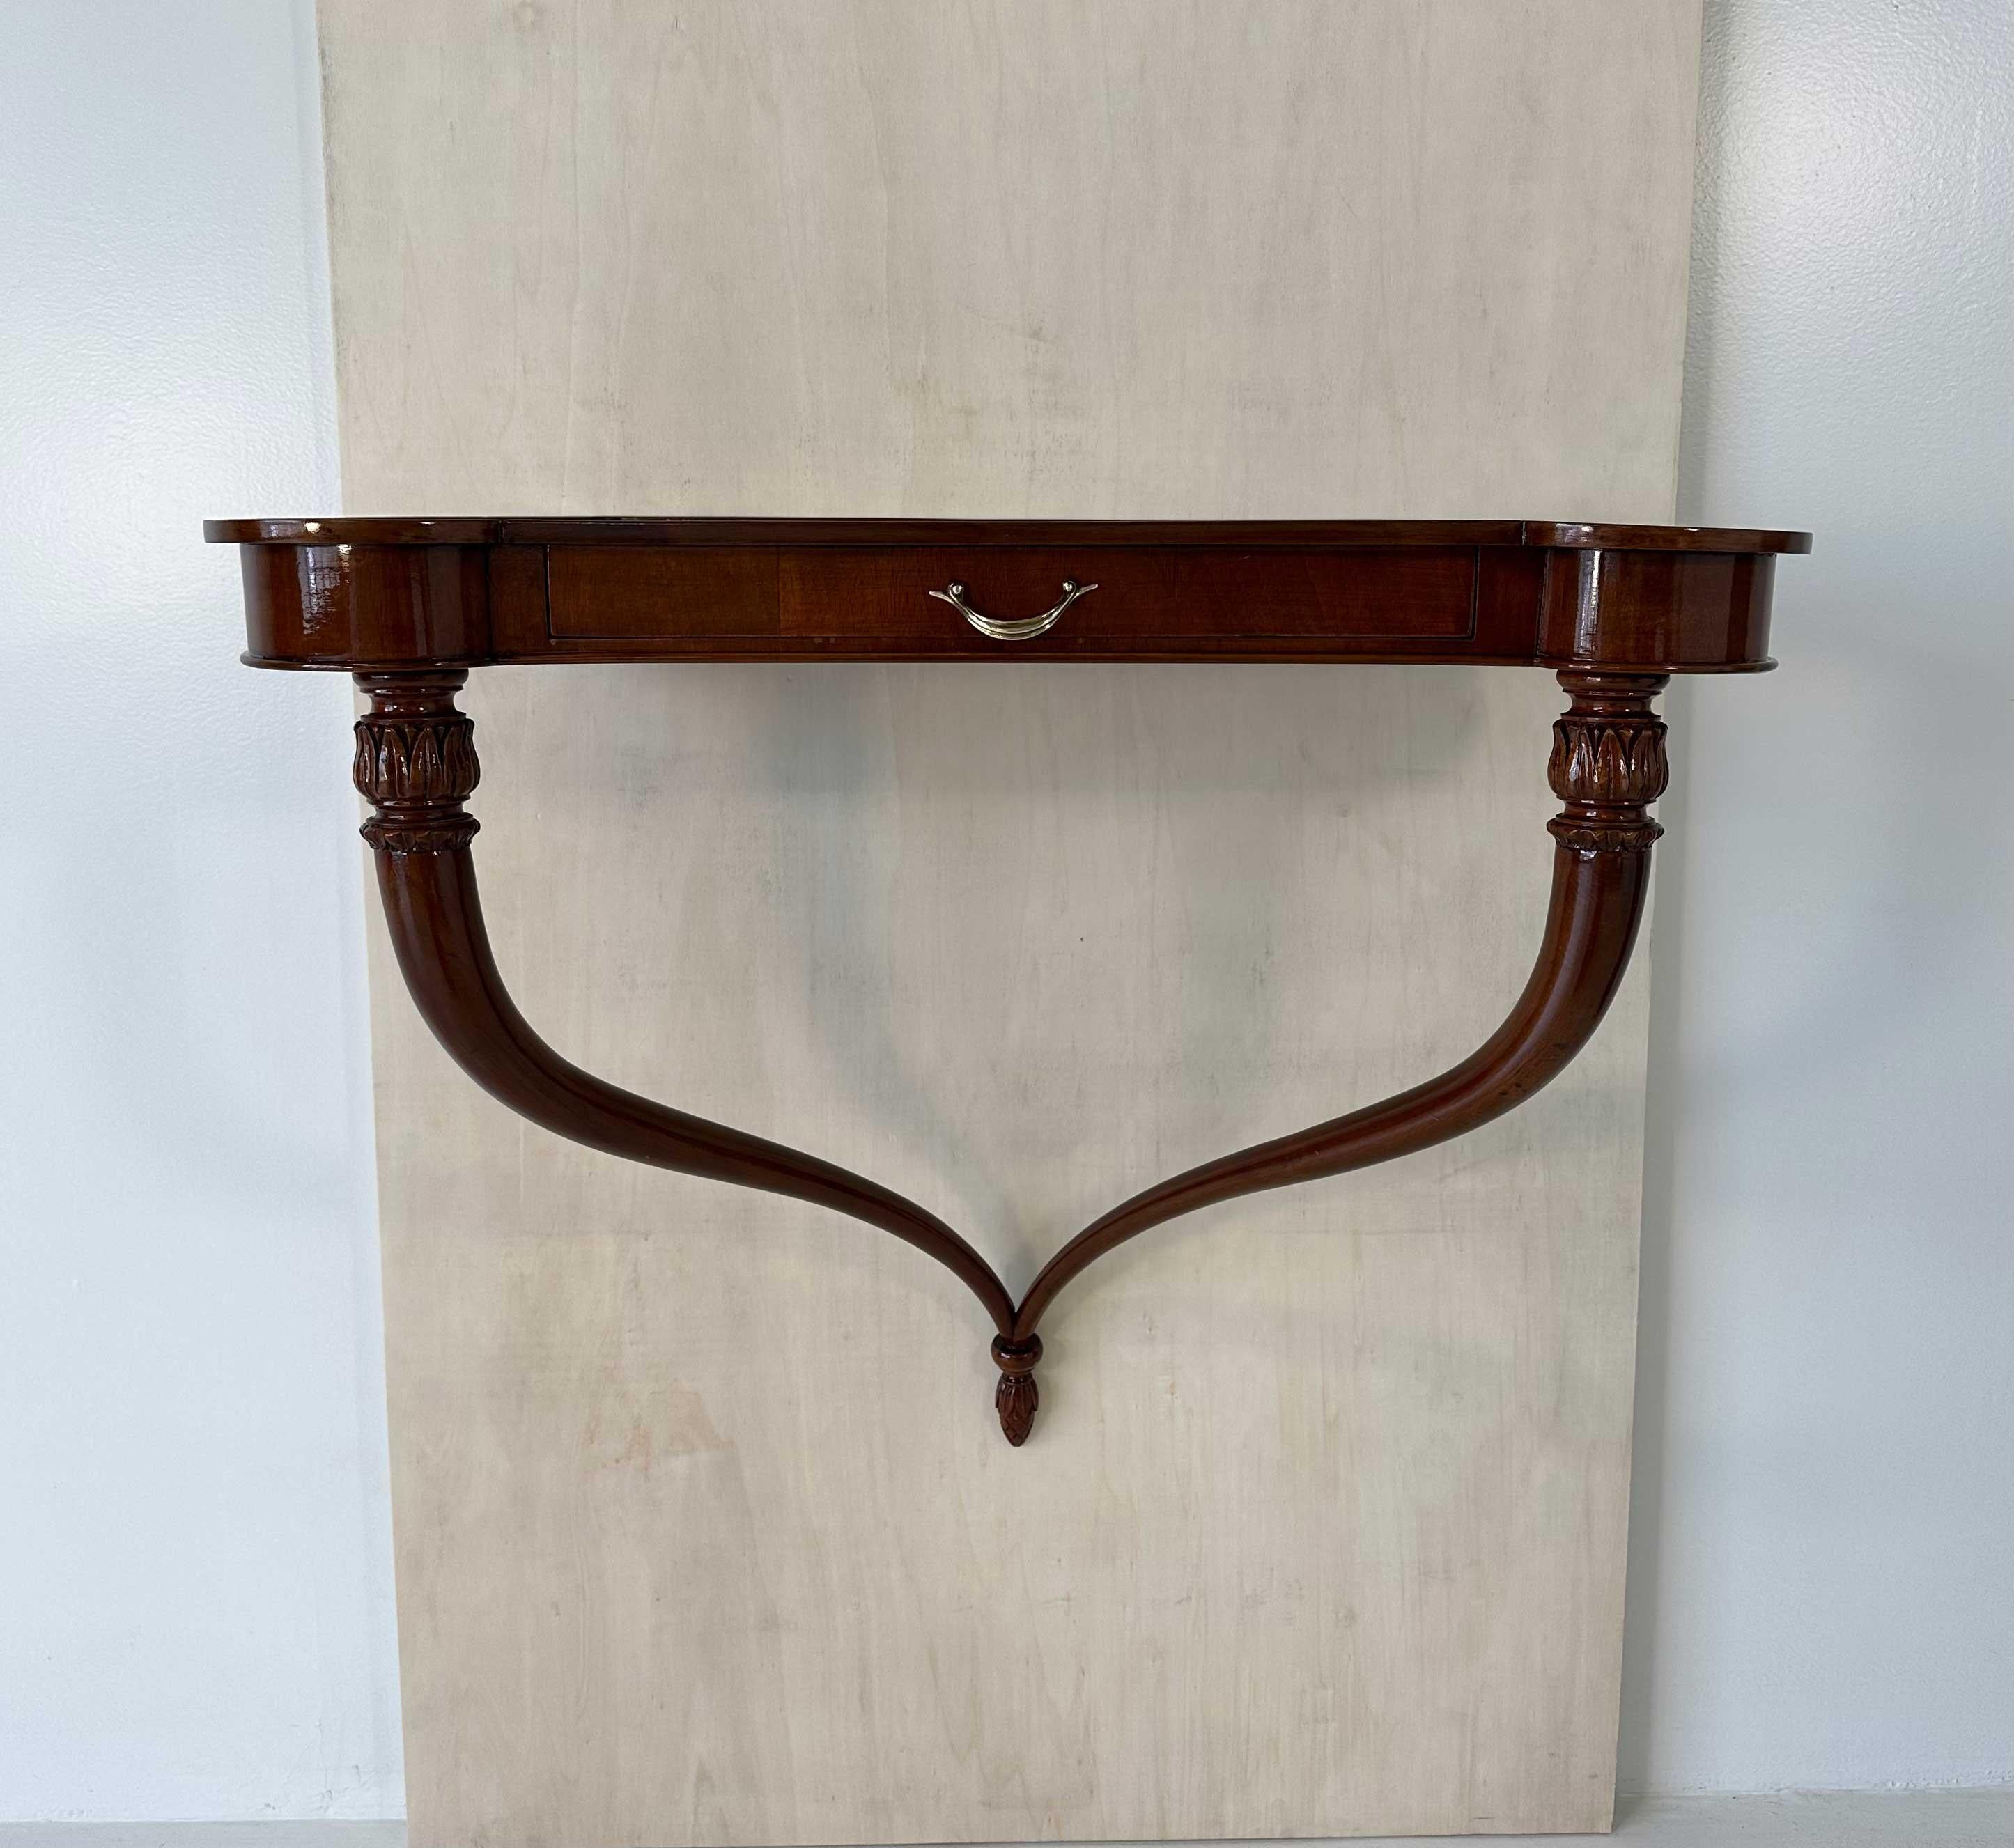 This elegant Art Deco console table was produced in Italy in the 1930s. 
It features a top with a comfortable drawer and sinuous shaped legs and it is completely in walnut with brass handles.

It is a suspended console and can be hung on the wall